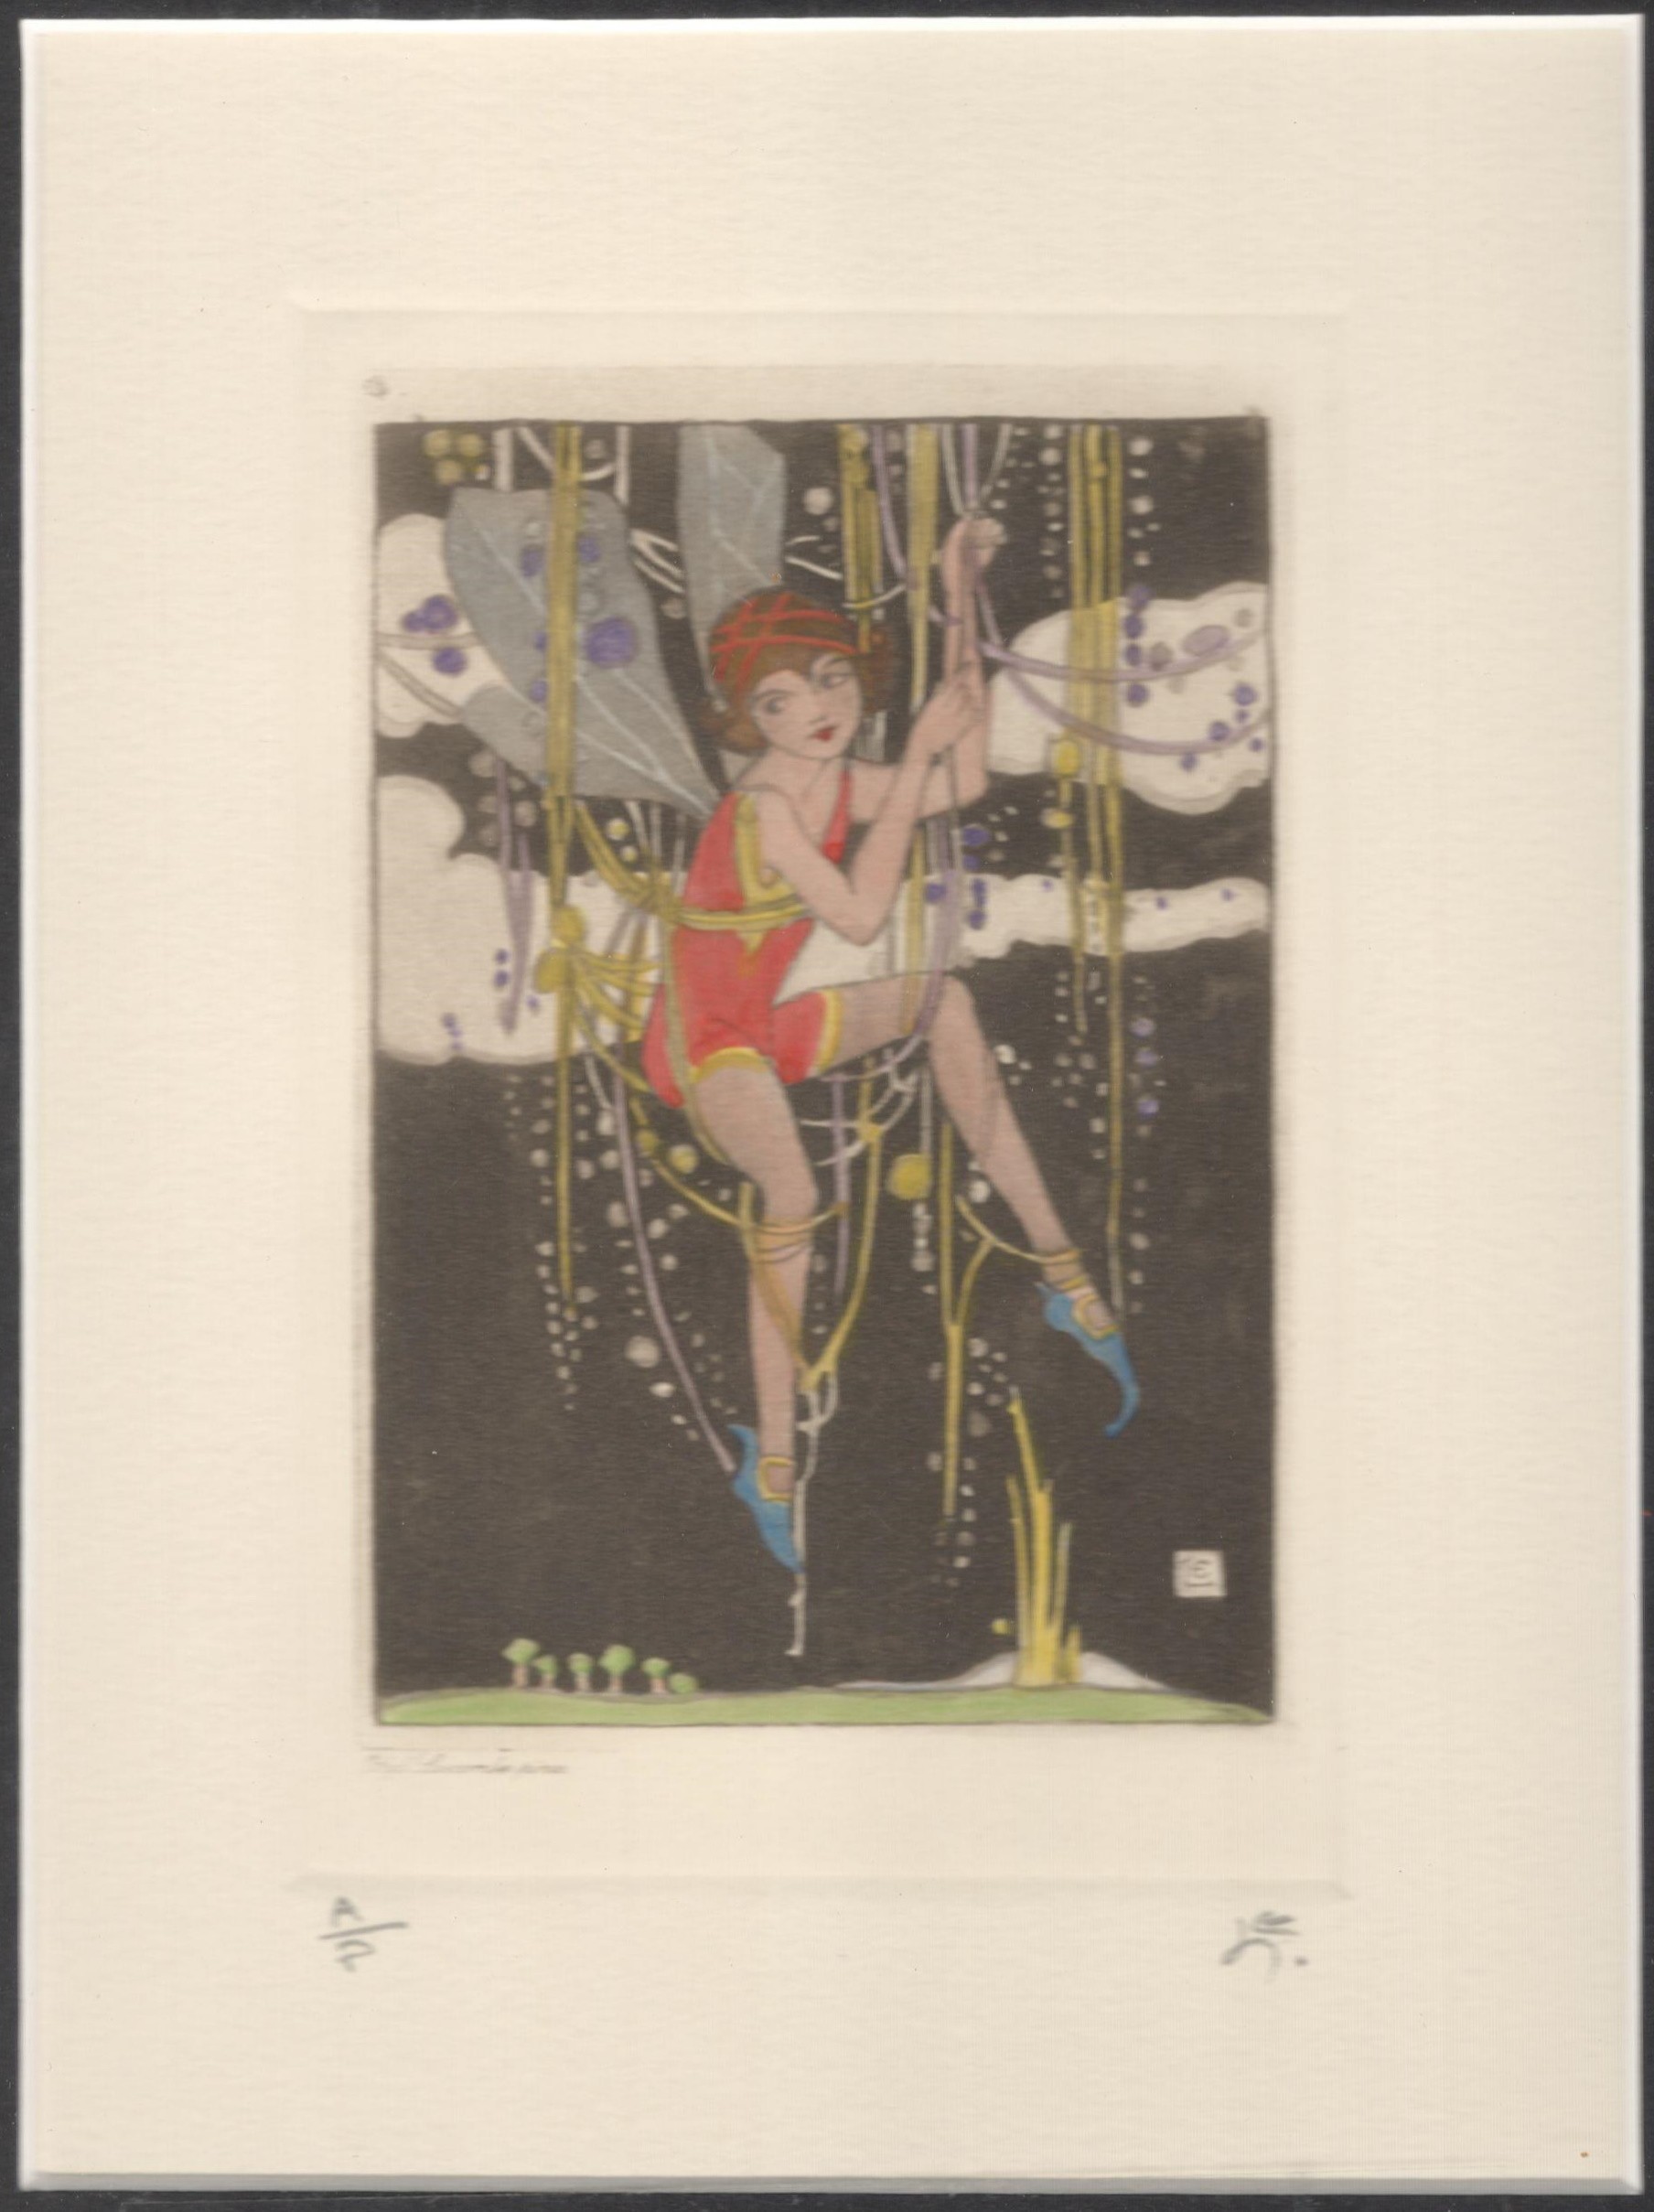 ETHEL LARCOMBE (1876-1940) PIXIE HAND-COLOURED ETCHING ON WOVE EARLY 20th century ARTIST PROOF - Image 3 of 3